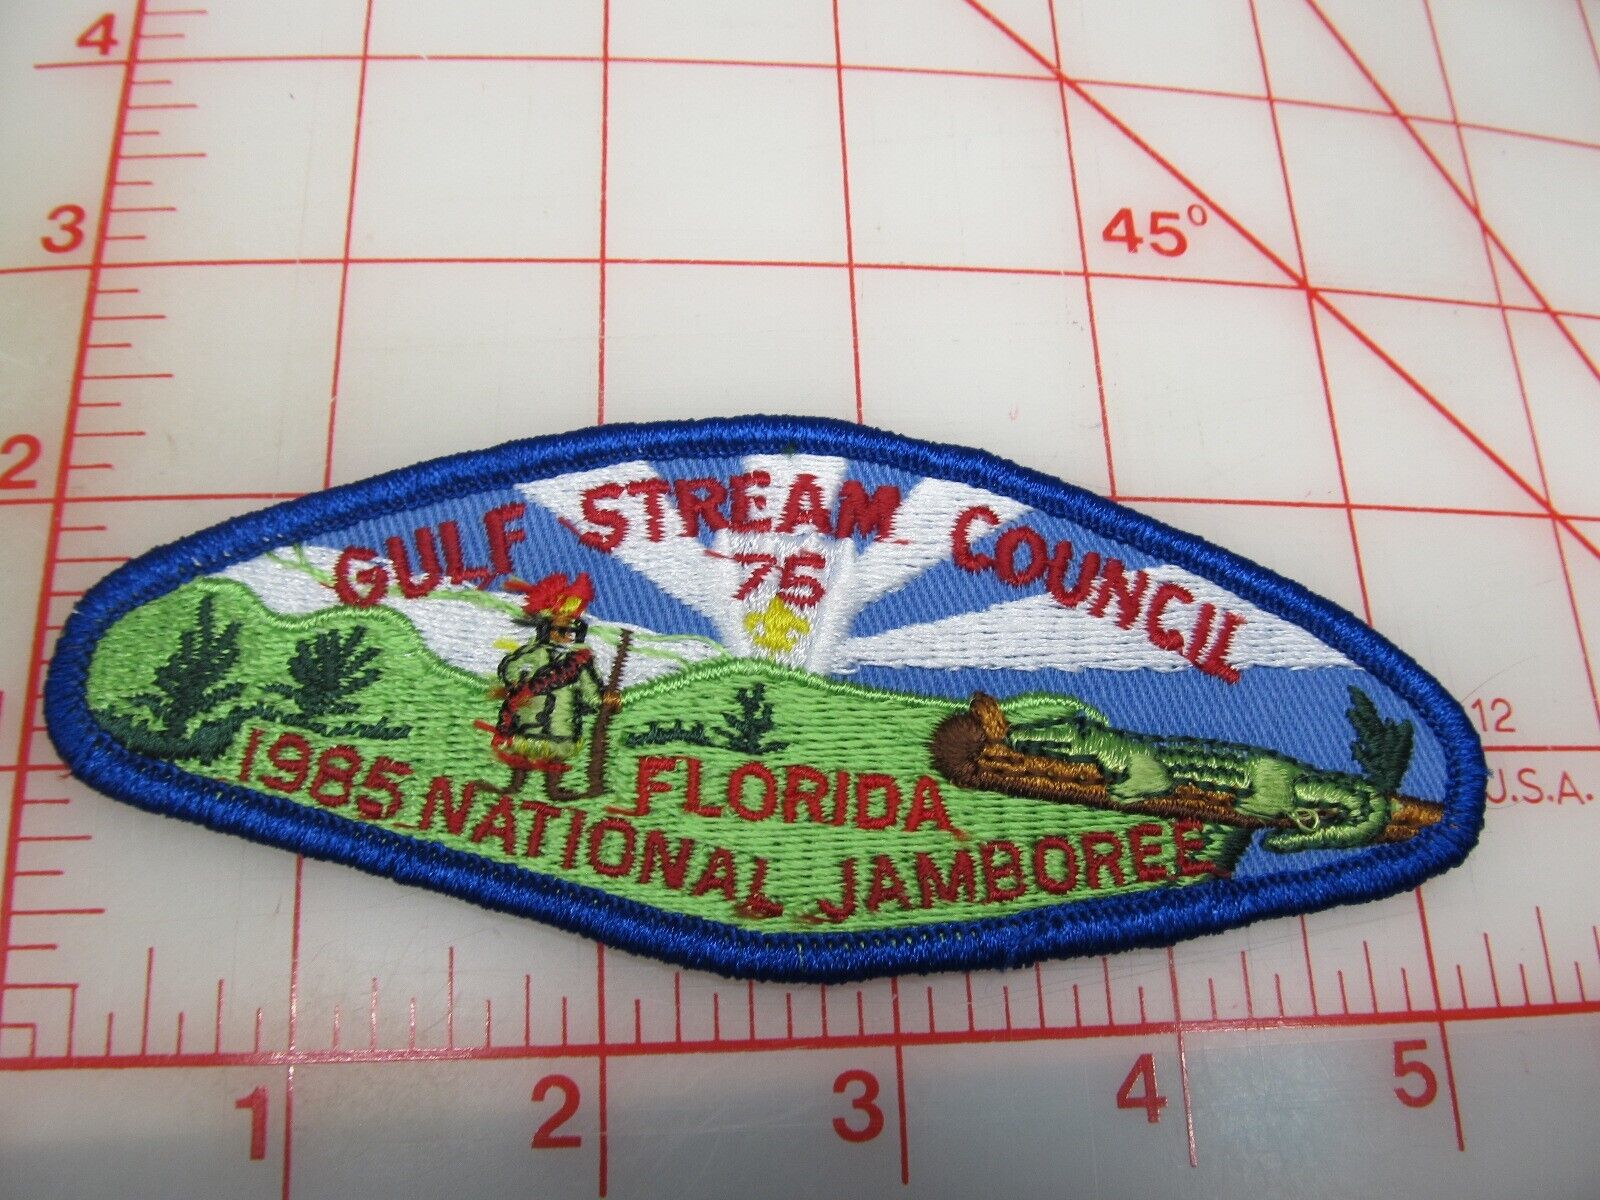 Gulf Stream Council 1985 JSP collectible patch (yB)